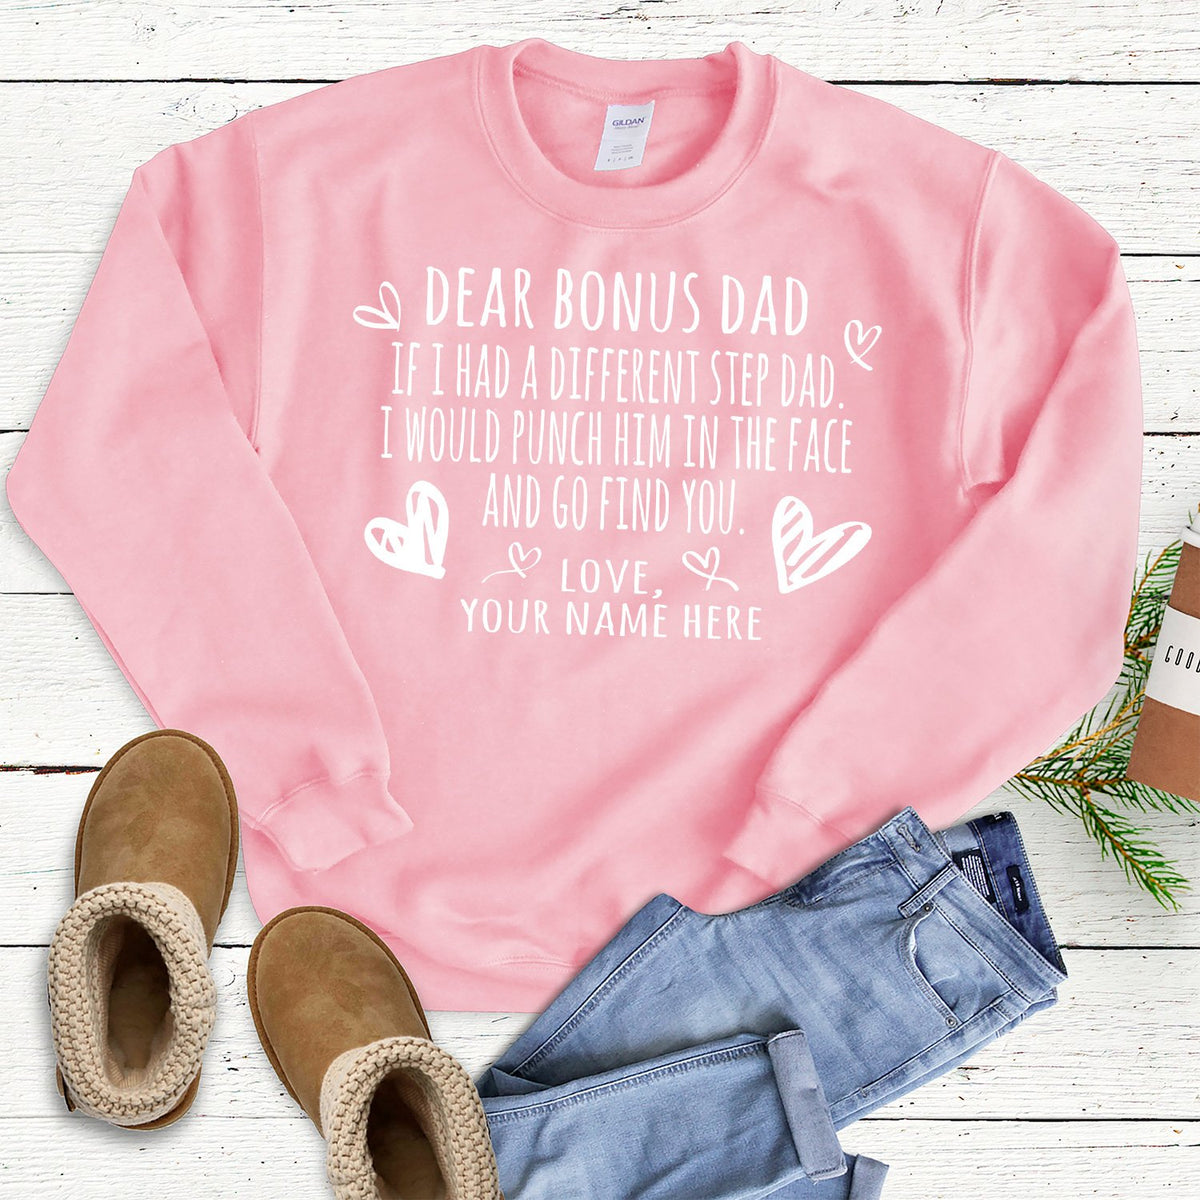 If I Had A Different Step Dad I Would Punch Him in The Face - Long Sleeve Heavy Crewneck Sweatshirt